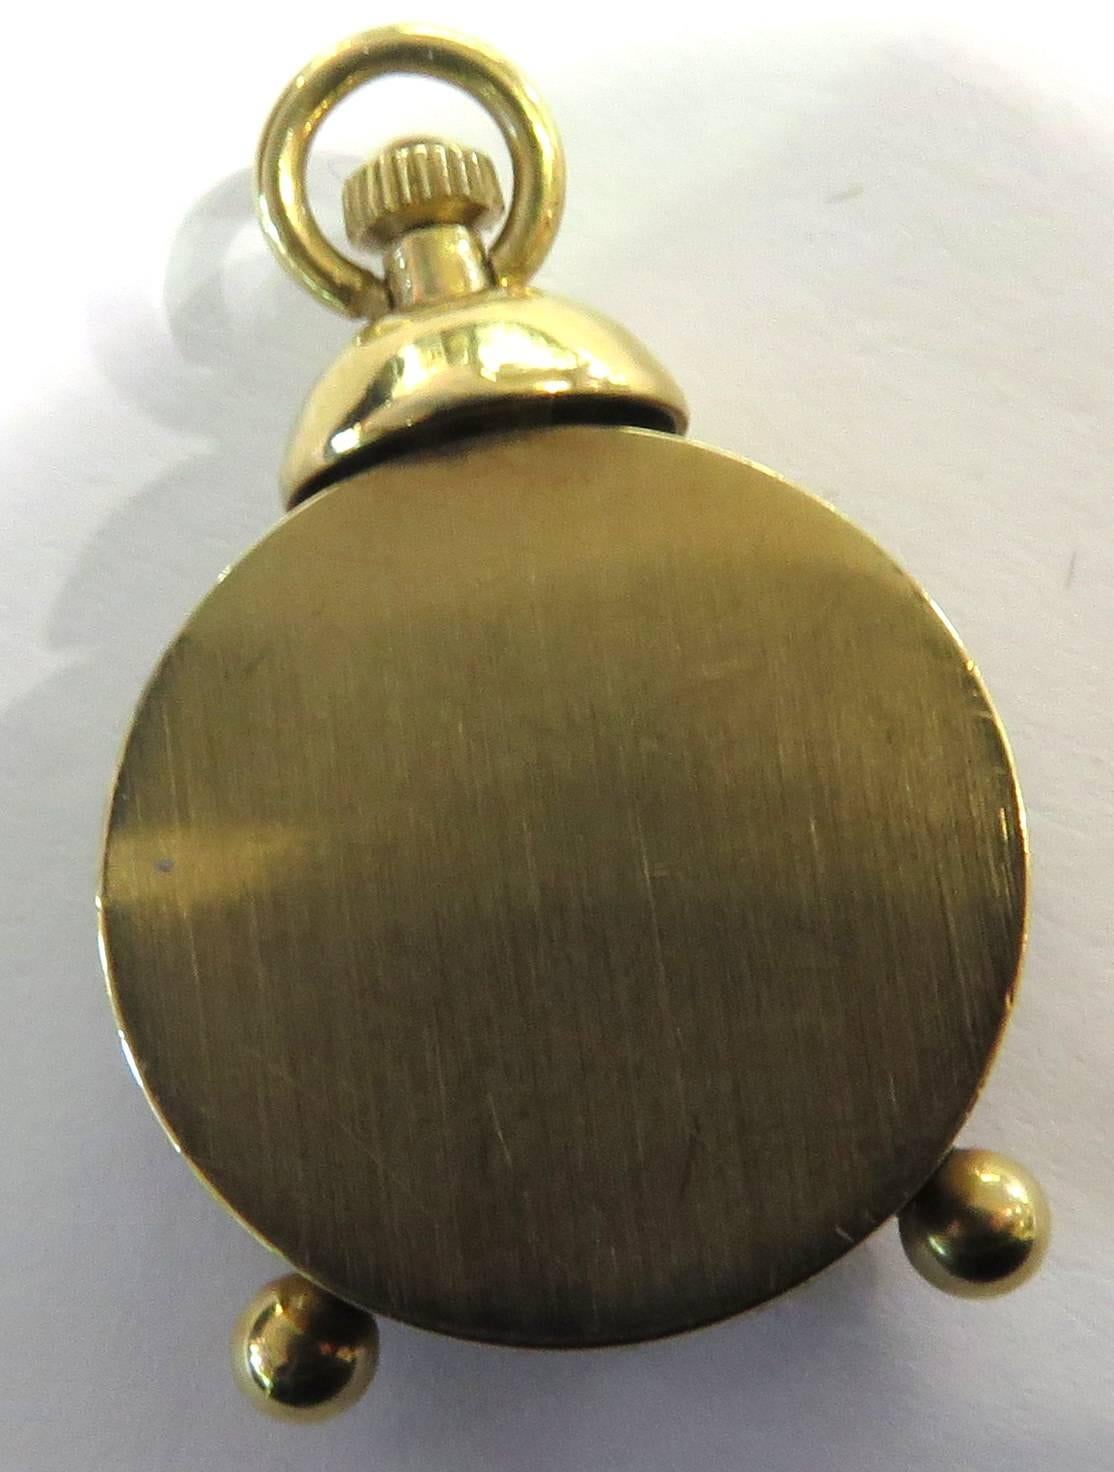 Unique Miniature Working Wittnauer Alarm Clock Gold Charm Pendant In Excellent Condition For Sale In Palm Beach, FL